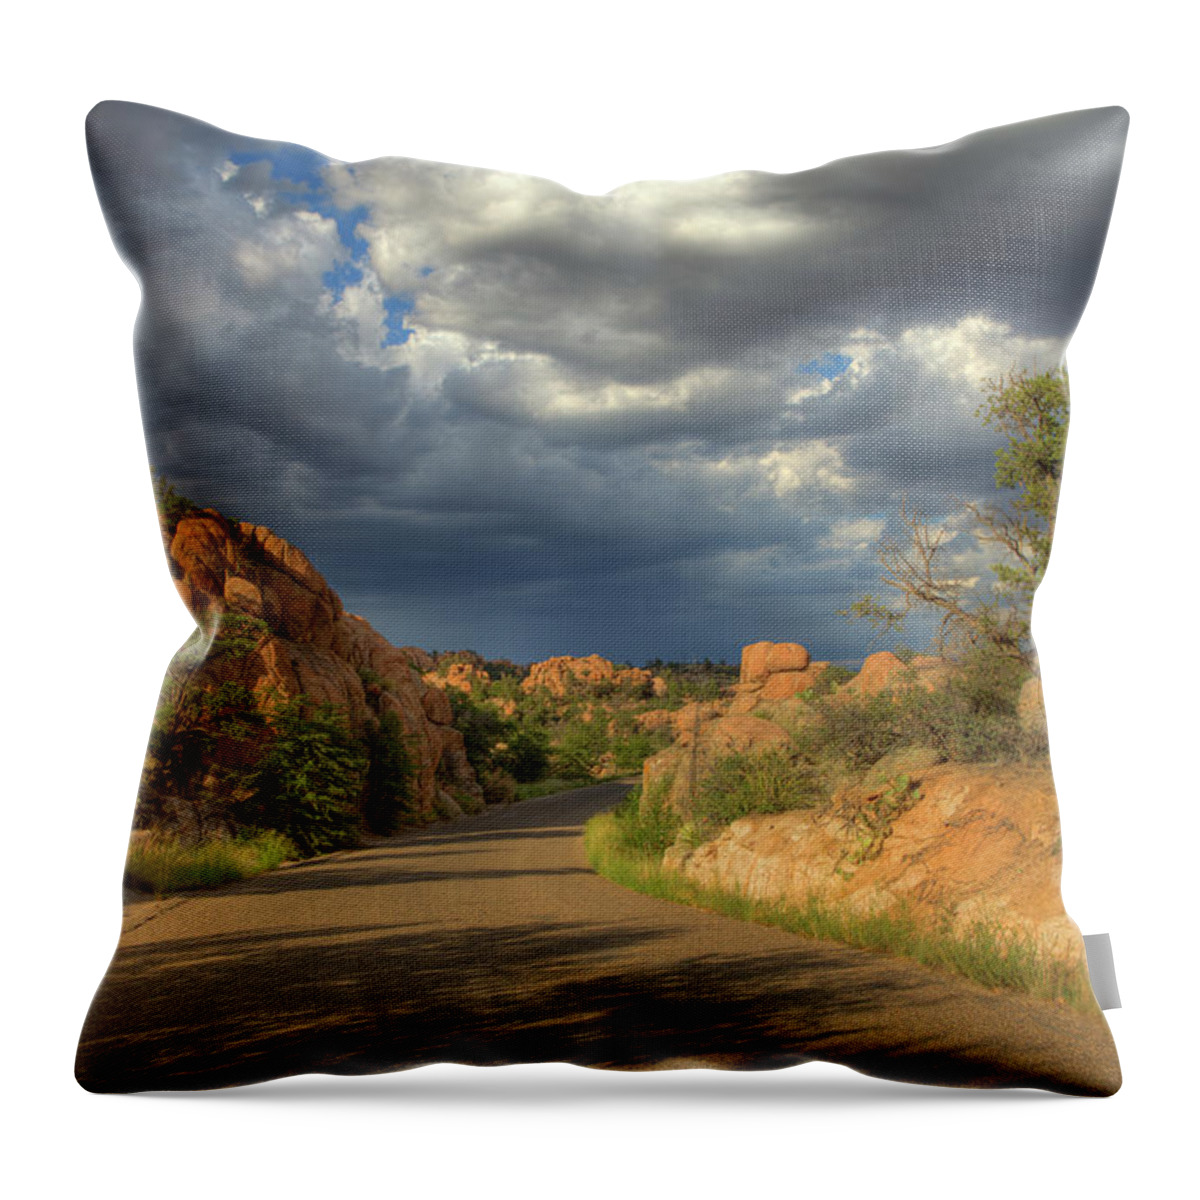 Scenics Throw Pillow featuring the photograph Desert Storm by Dusty Pixel Photography